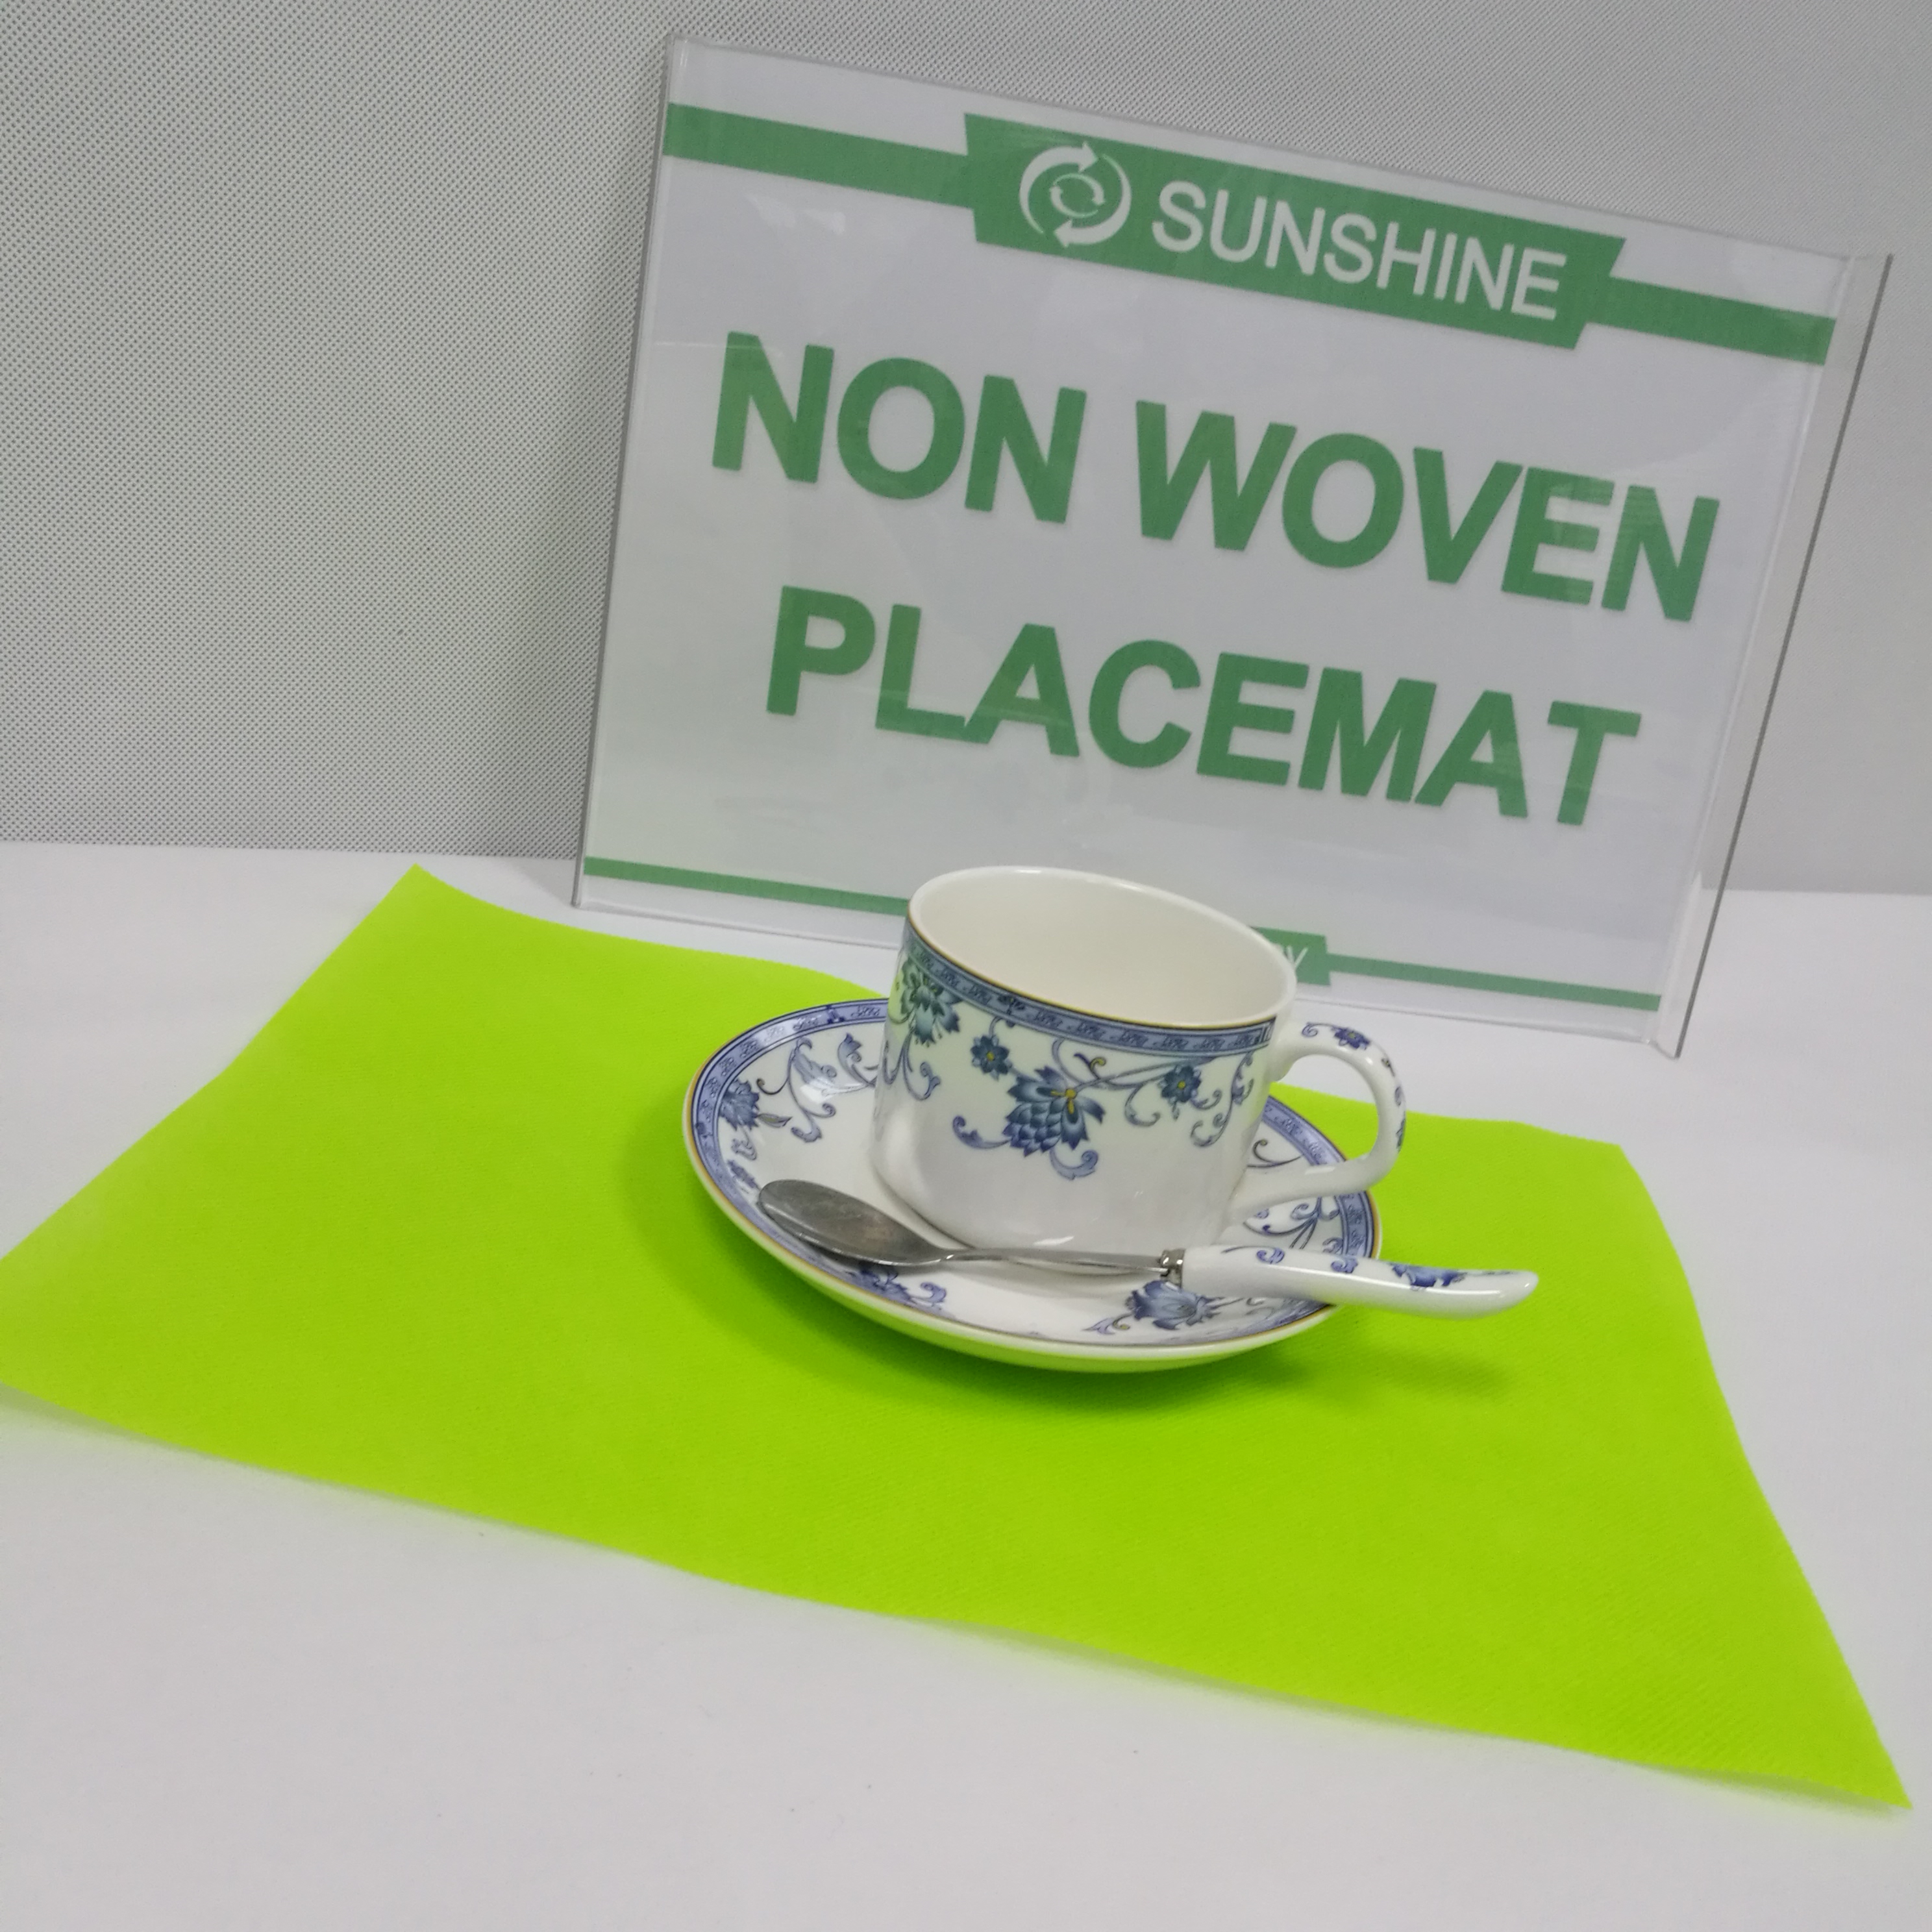  Waterproof tablecloths Placemat nonwoven Desktop coffee pad Disposable coaster 50*50cm colorful